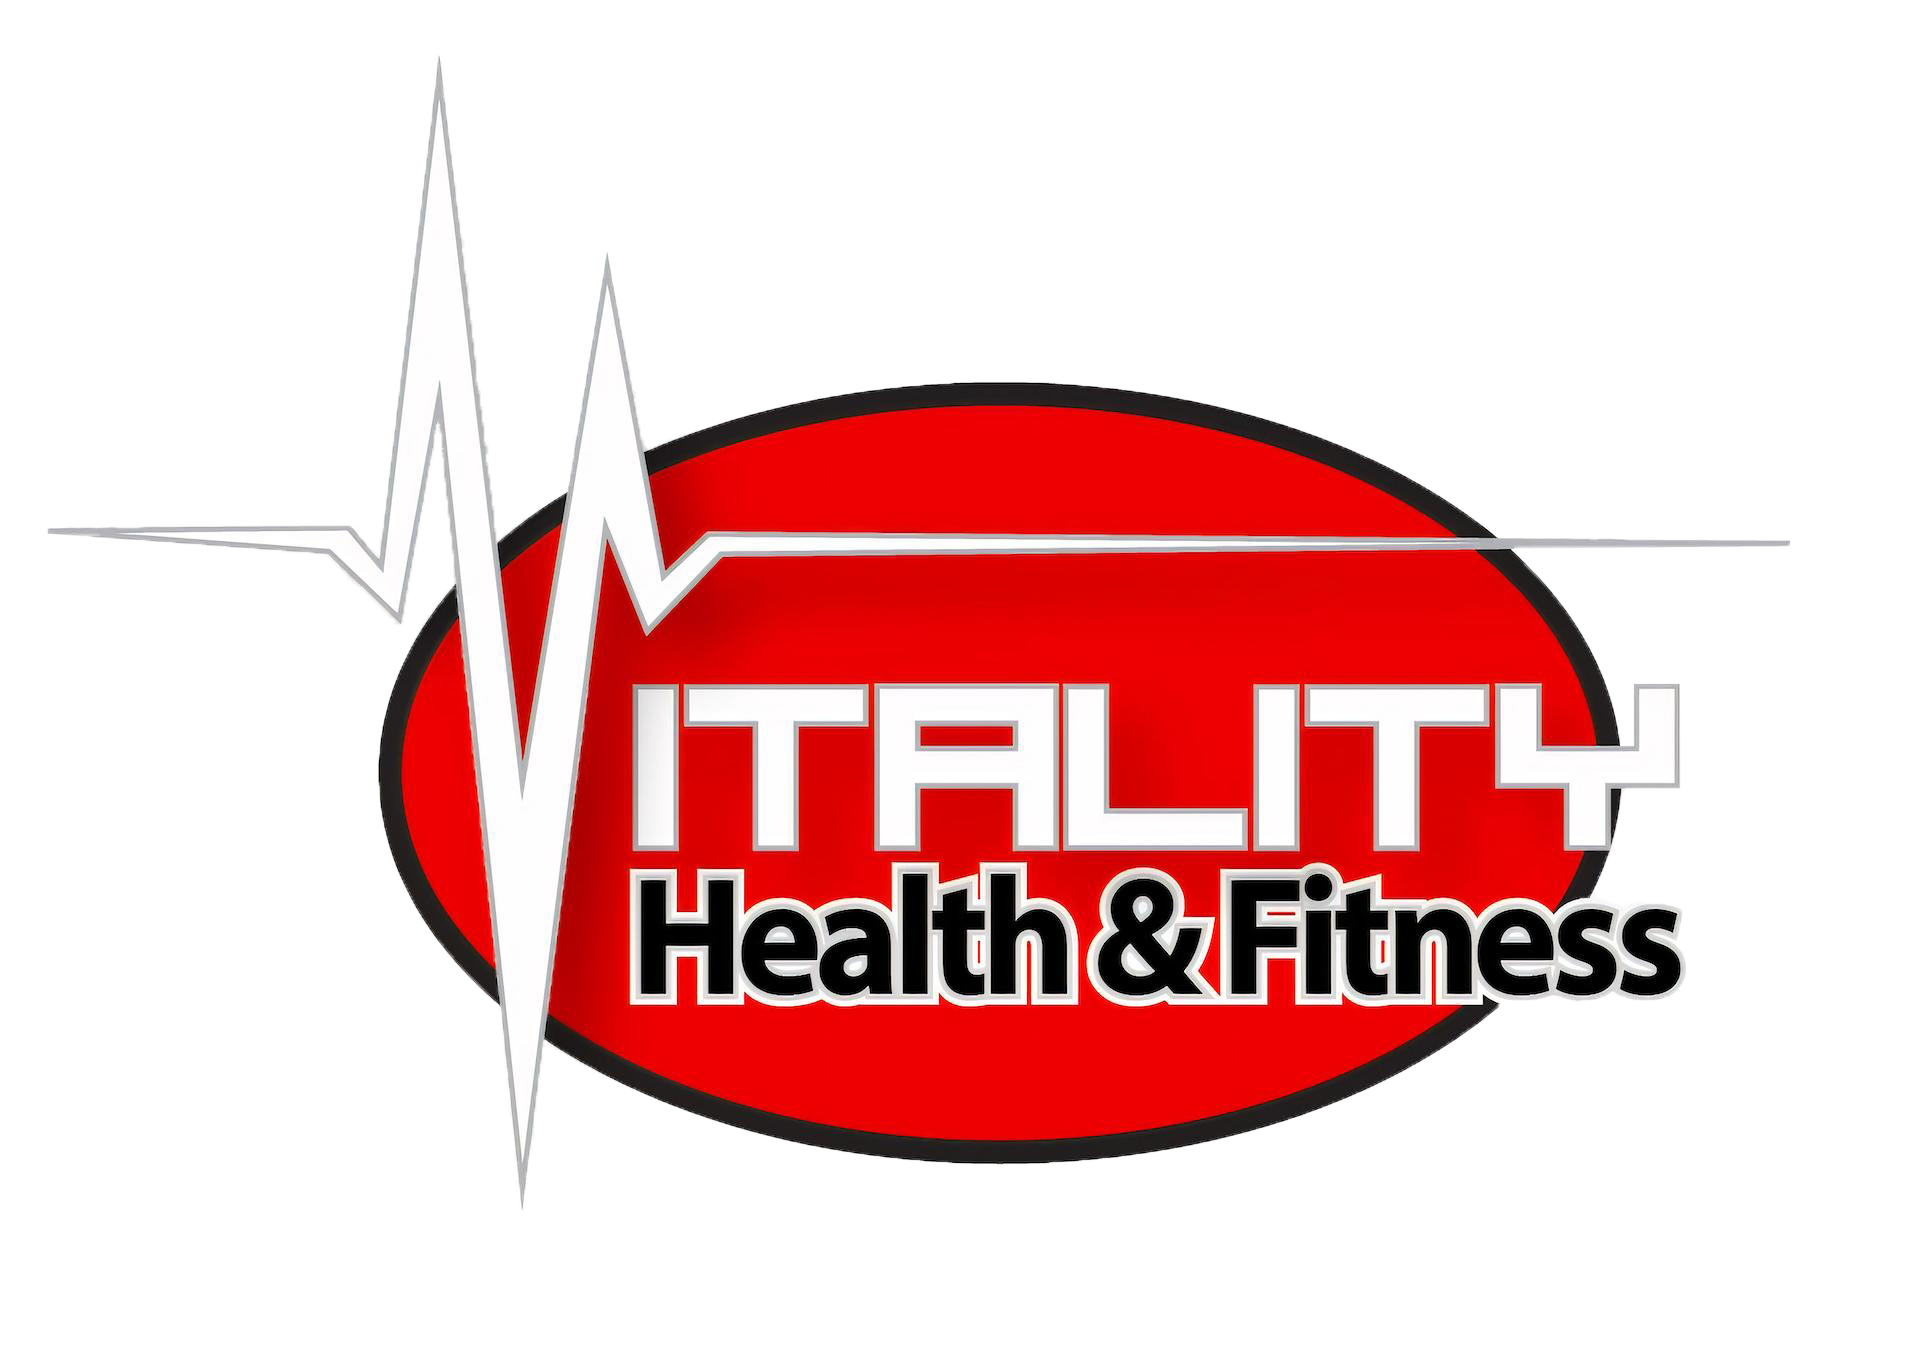 https://vitalityhealth-fitness.com/wp-content/uploads/2020/07/Logo-Large-1920x1080-Trans.png